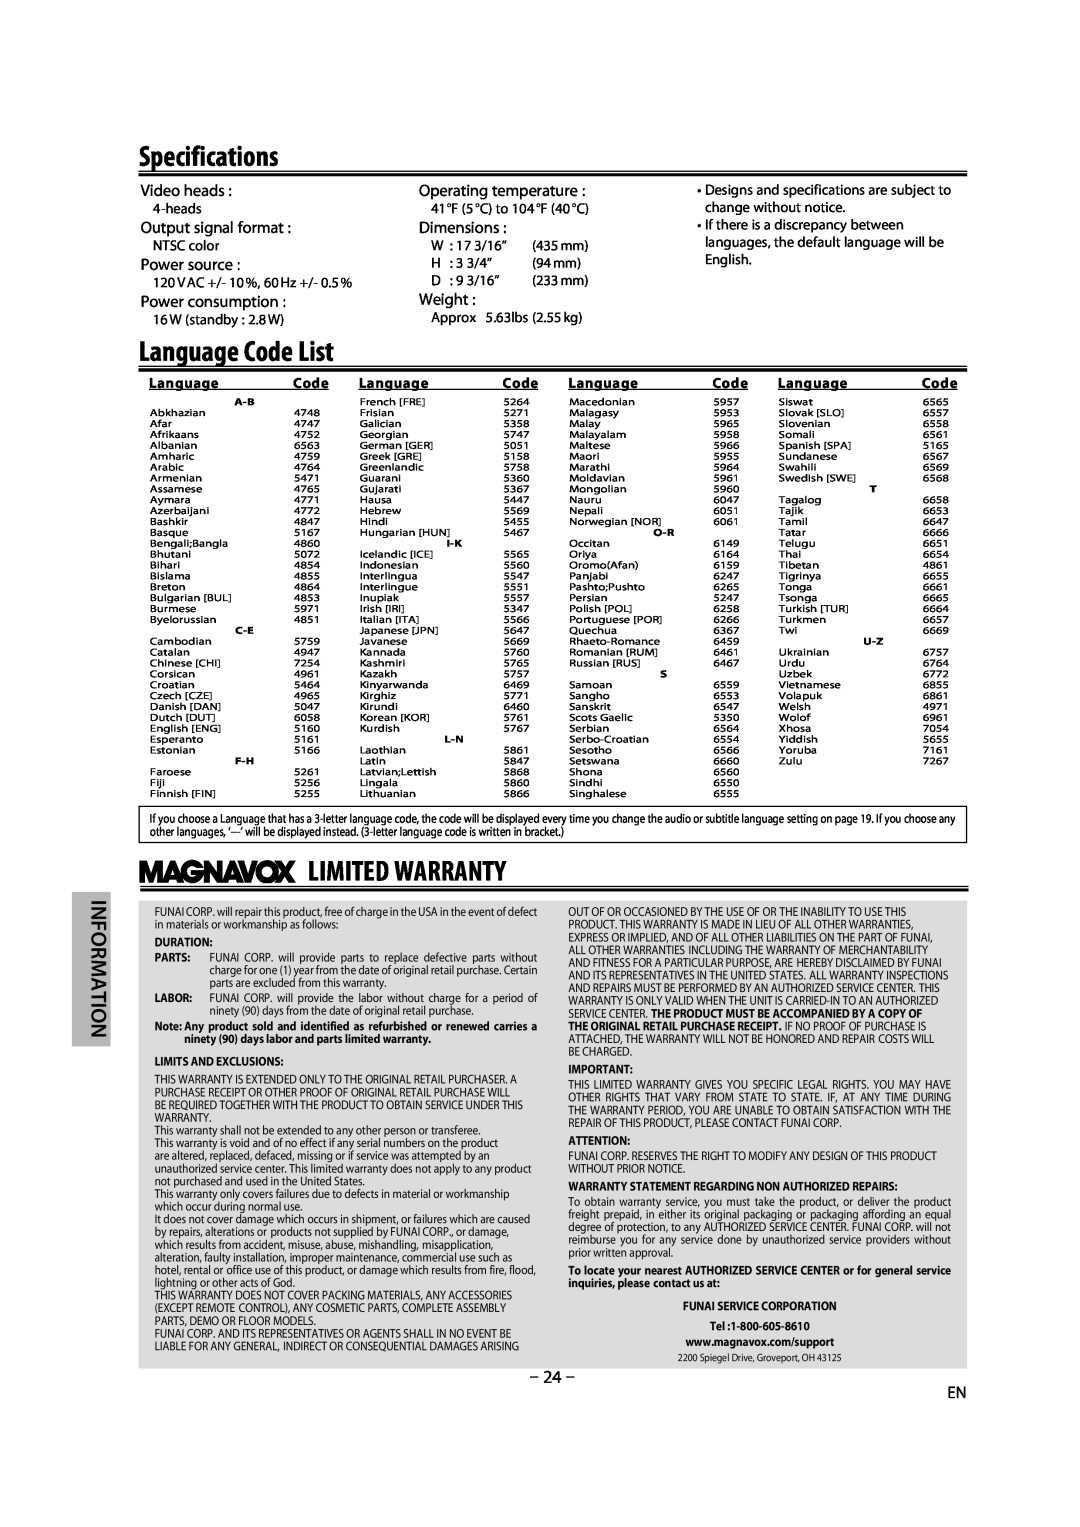 Magnavox DV225MG9 owner manual Specifications, Limited Warranty, Language Code List, Information 